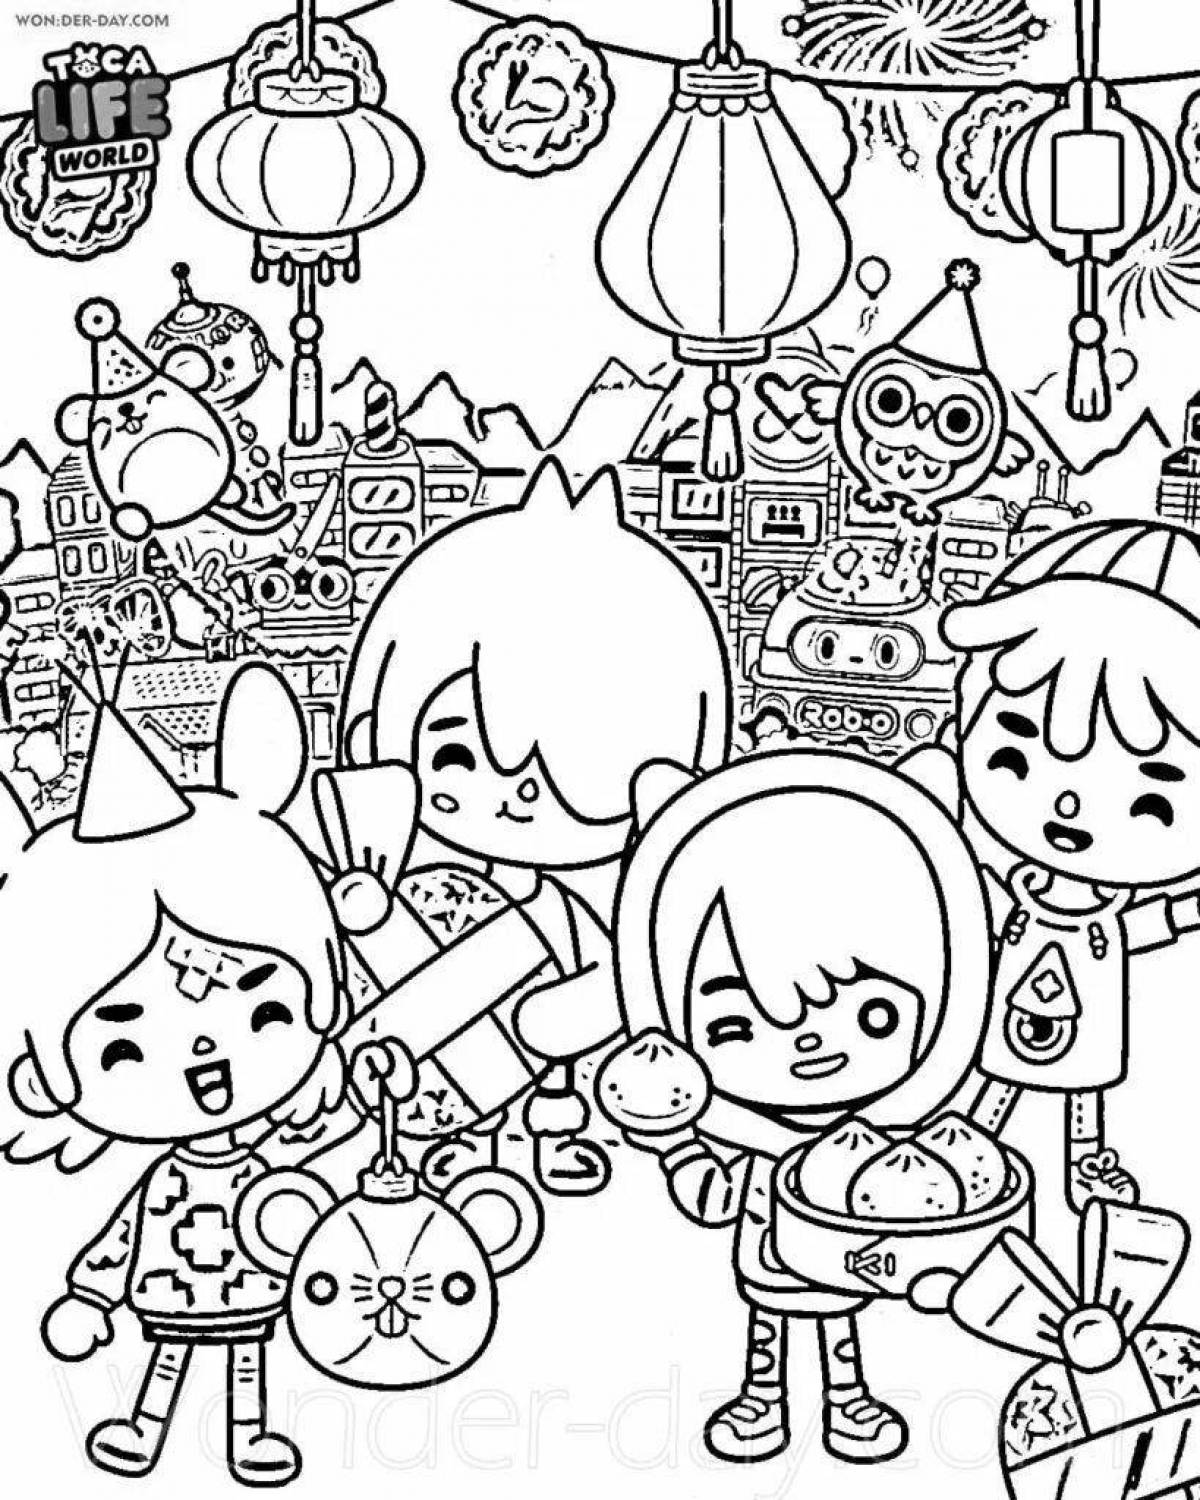 Coloring book glowing world toca